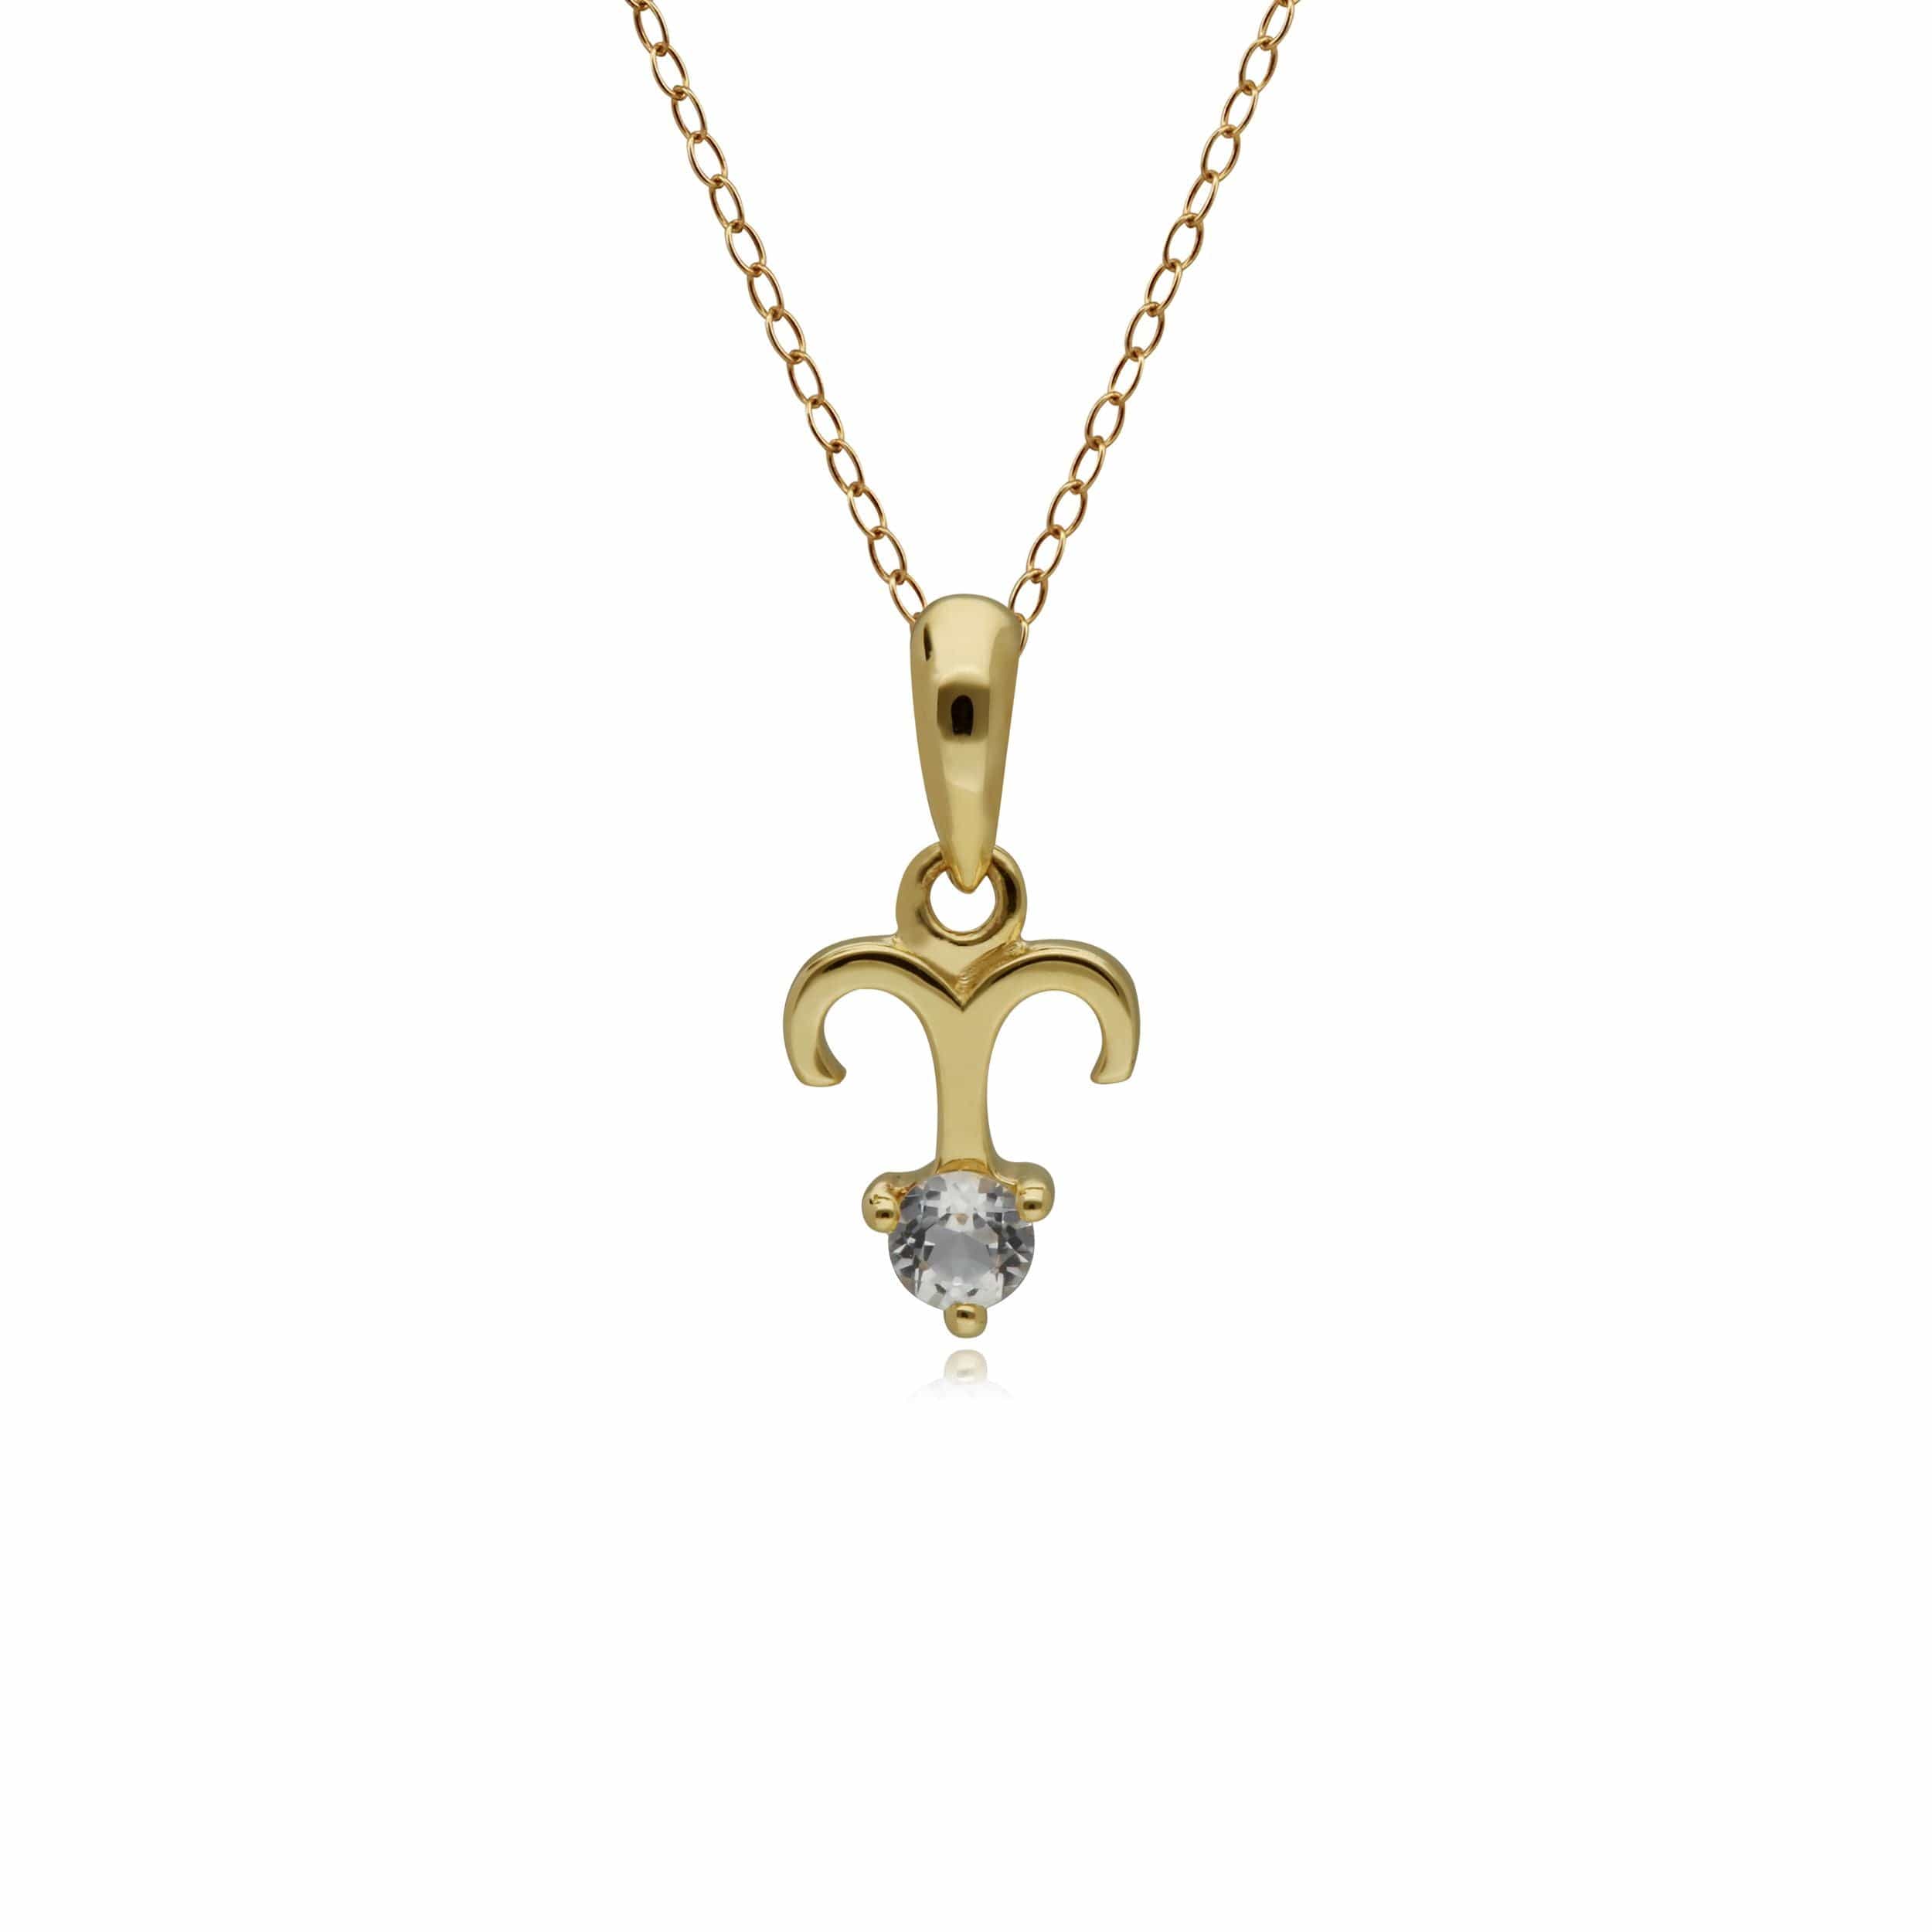 135P1995019 White Topaz Aries Zodiac Charm Necklace in 9ct Yellow Gold 1